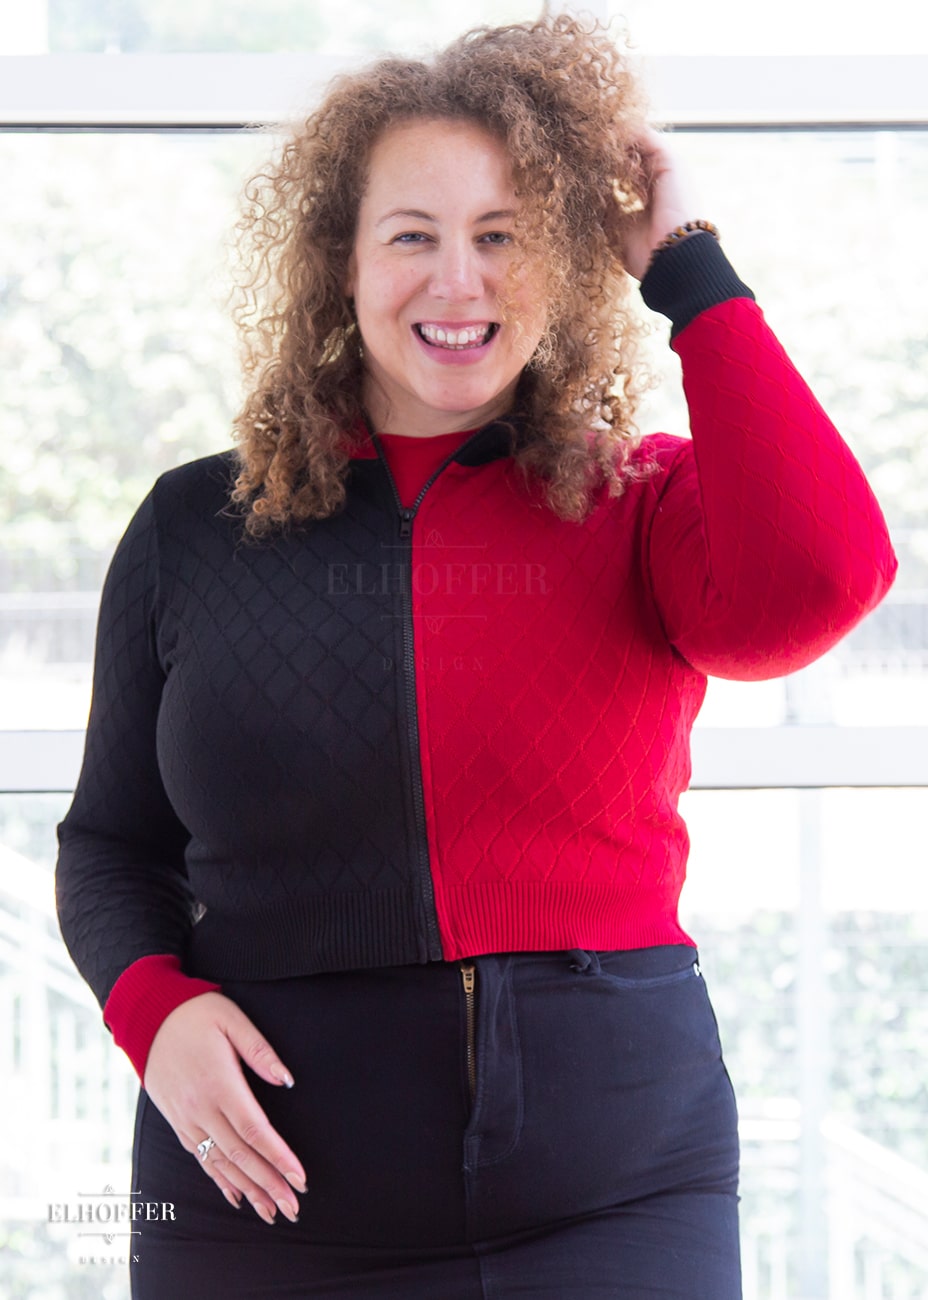 Anastasia, a curly haired, medium-skinned size XL model, is wearing our Kwinn zip up cardigan. It is a zip up cardigan with fitted long sleeves and a high neckline. The knit body has a diamond pattern, one side is black, the other red, with opposite colored cuffs.